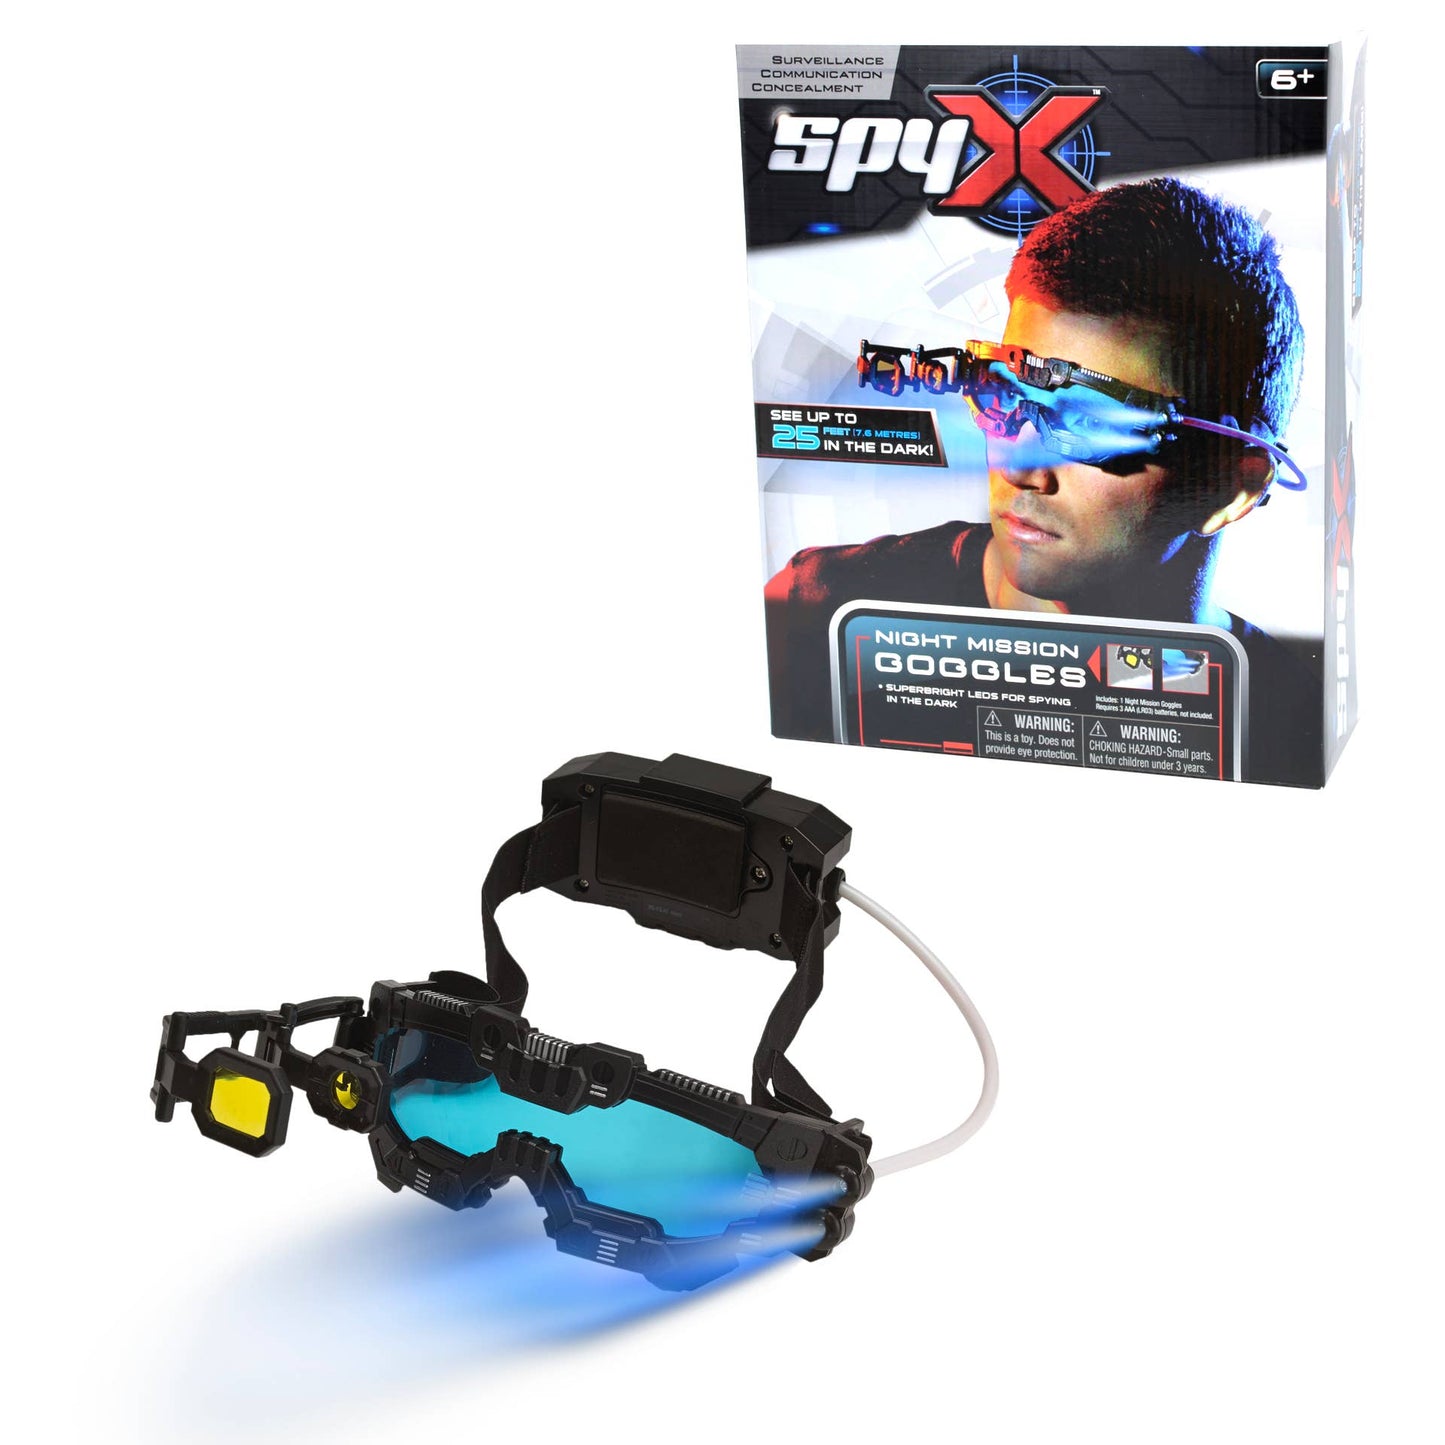 Night Mission Goggles- Twin LED Light Beams For Night Vision - Einstein's Attic